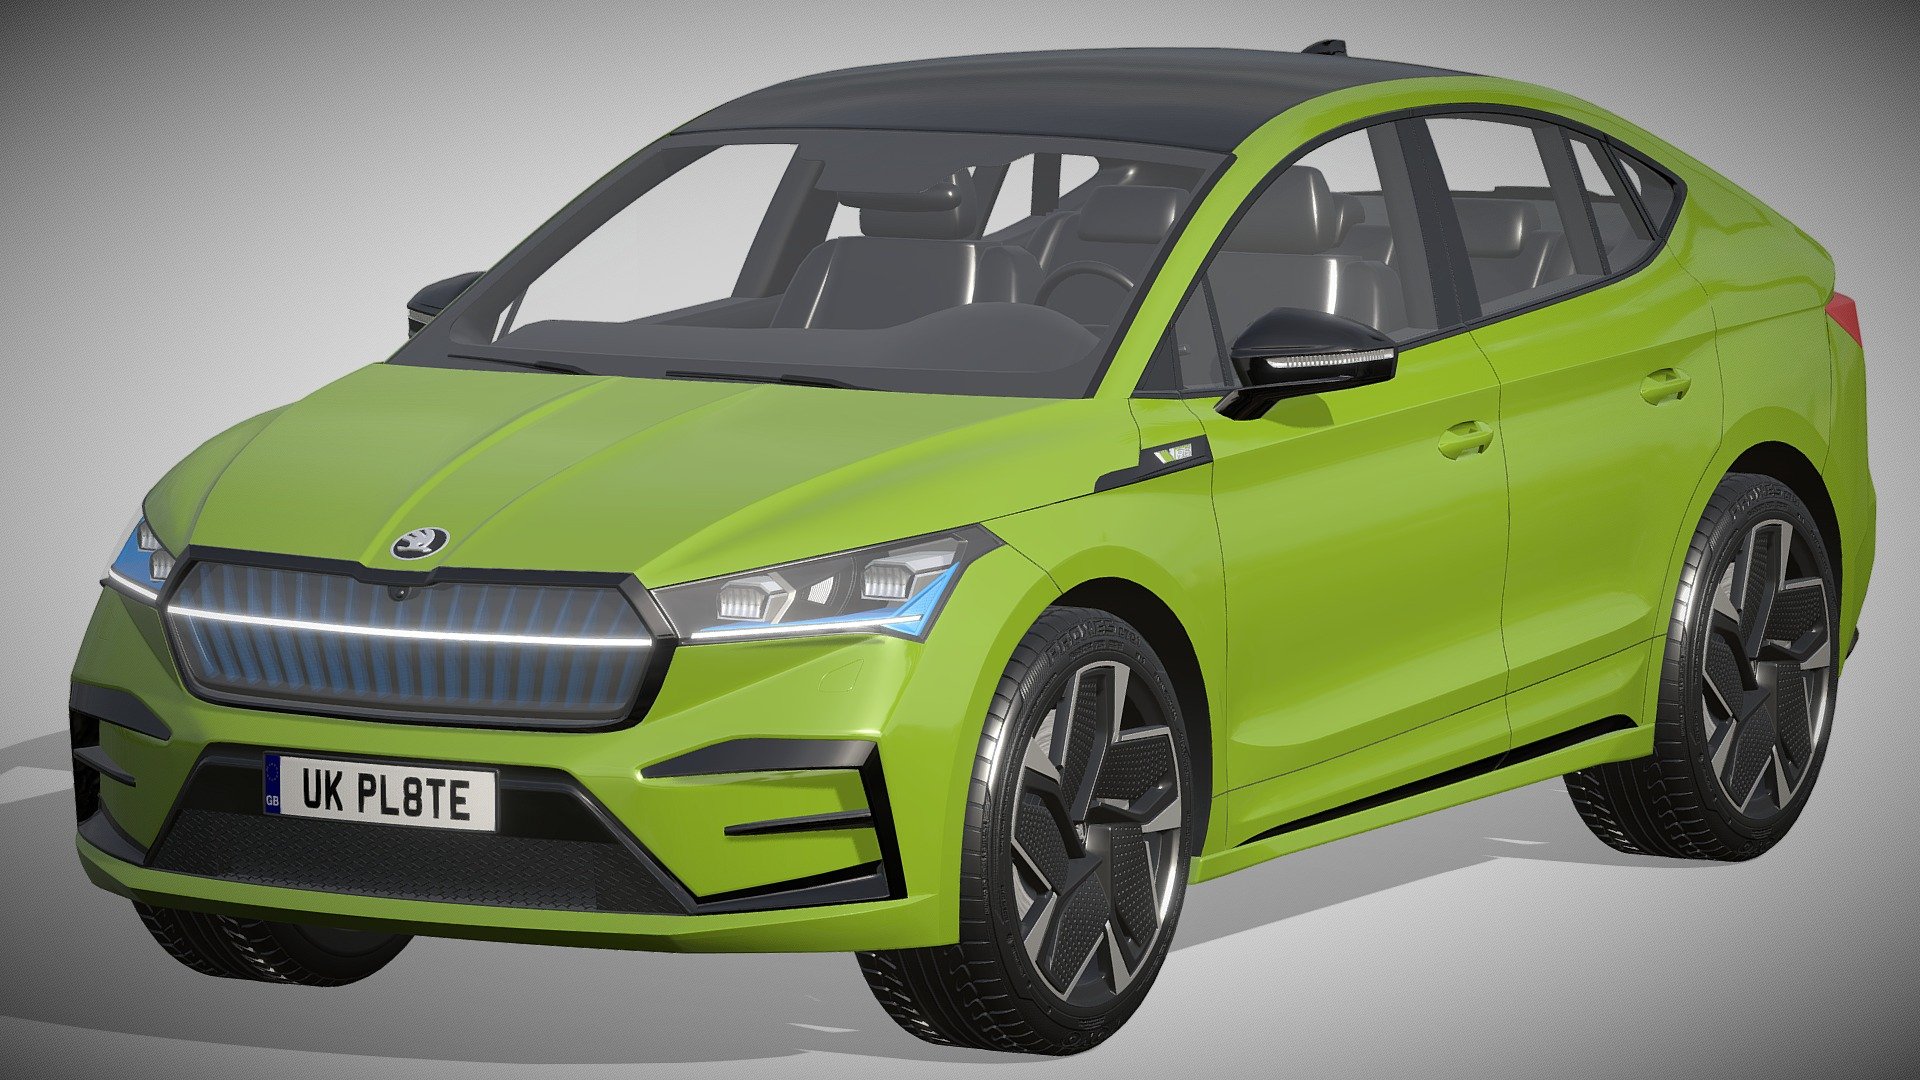 Skoda Enyaq Coupe RS iV

https://www.skoda-auto.com/models/range/enyaq-coupe-rs-iv

Clean geometry Light weight model, yet completely detailed for HI-Res renders. Use for movies, Advertisements or games

Corona render and materials

All textures include in *.rar files

Lighting setup is not included in the file! - Skoda Enyaq Coupe RS iV - Buy Royalty Free 3D model by zifir3d 3d model